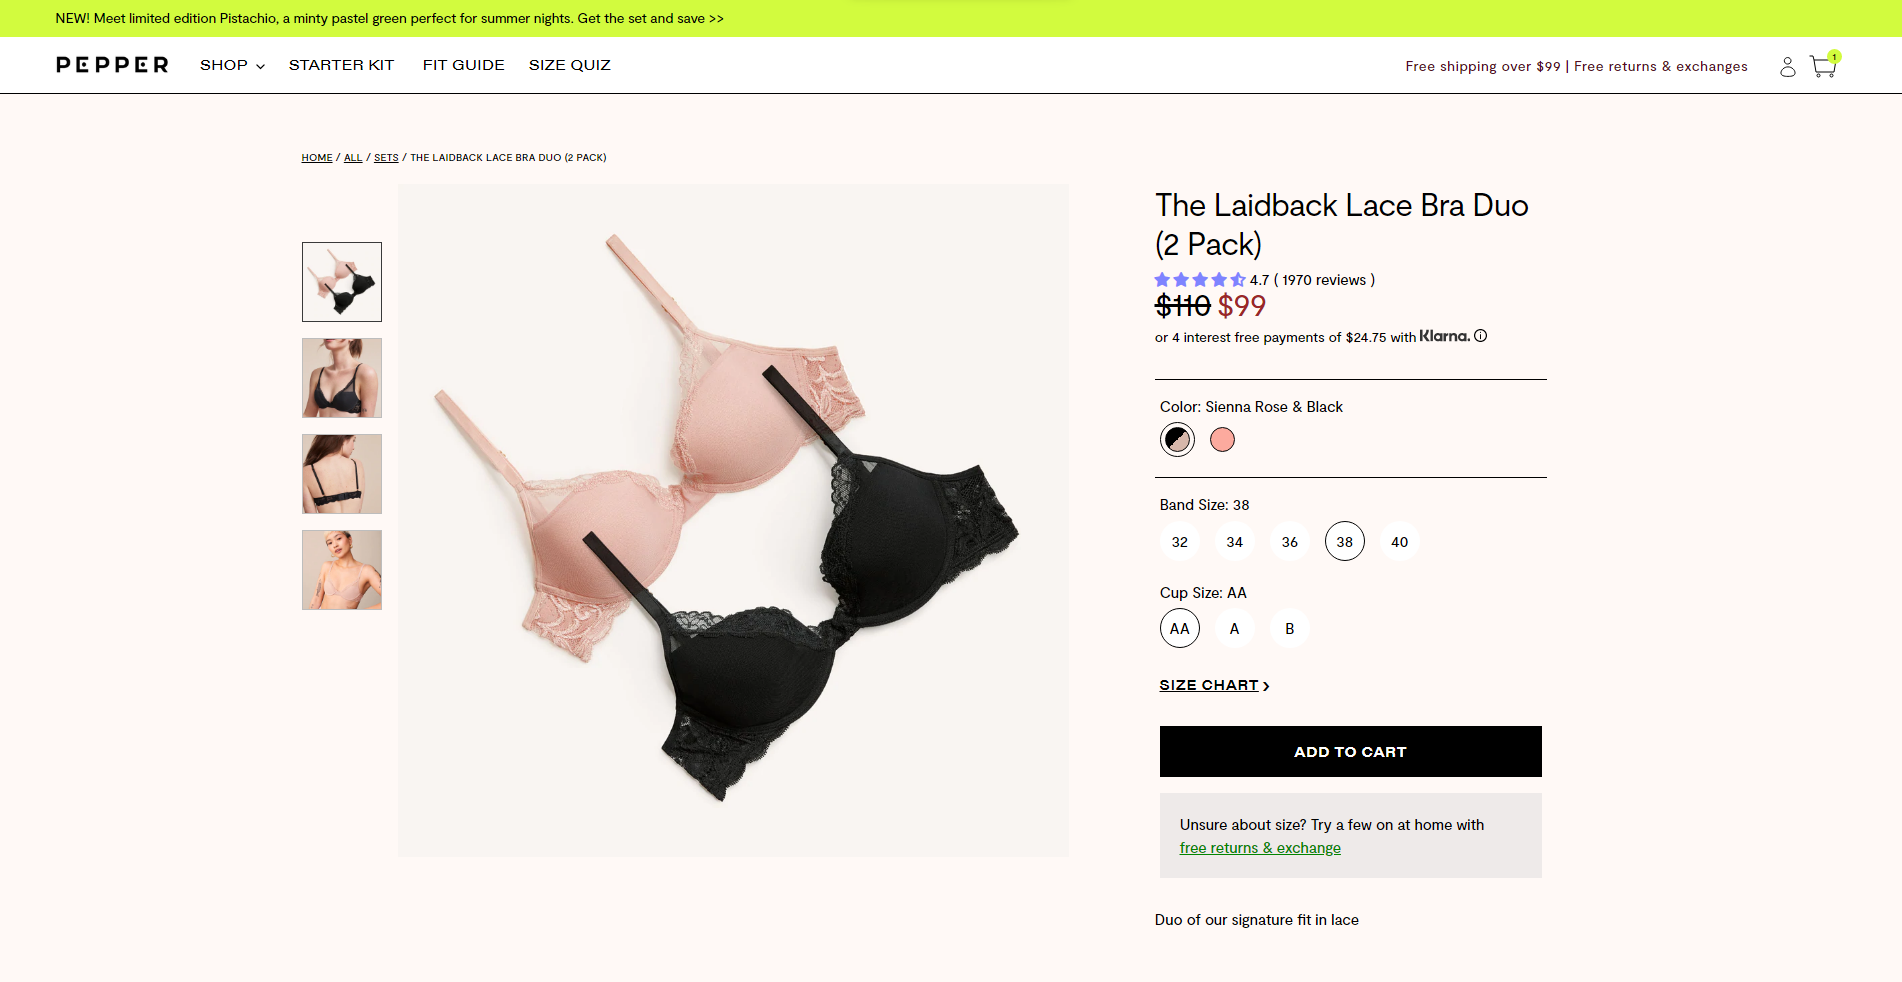 Pepper's Bundle Bra Product Display Page